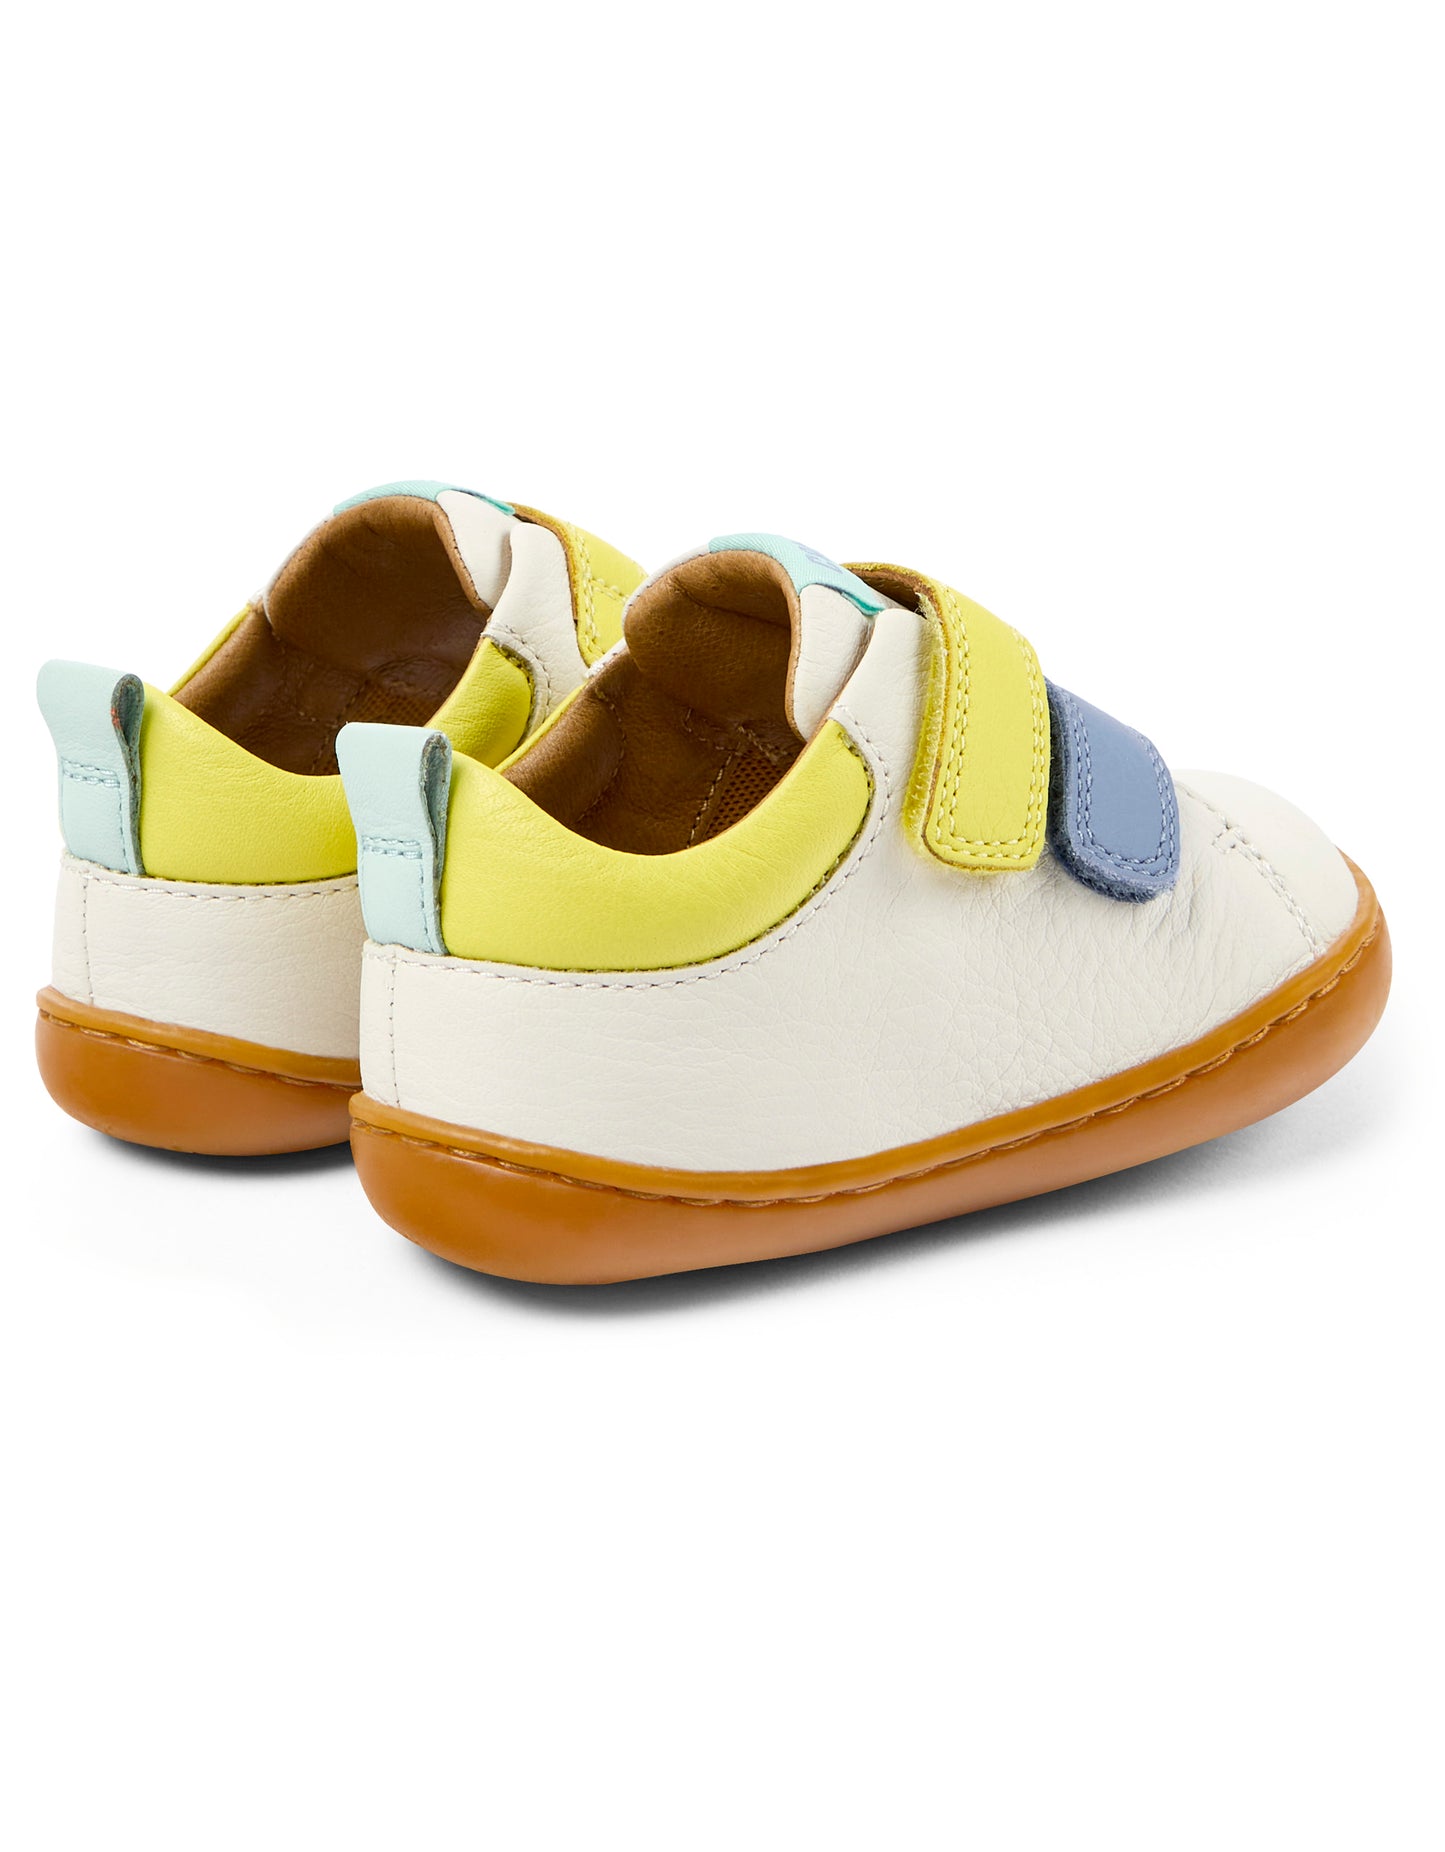 A unisex shoe by Camper, style Peu, in white with blue and yellow velcro straps. Rear side view of a pair.